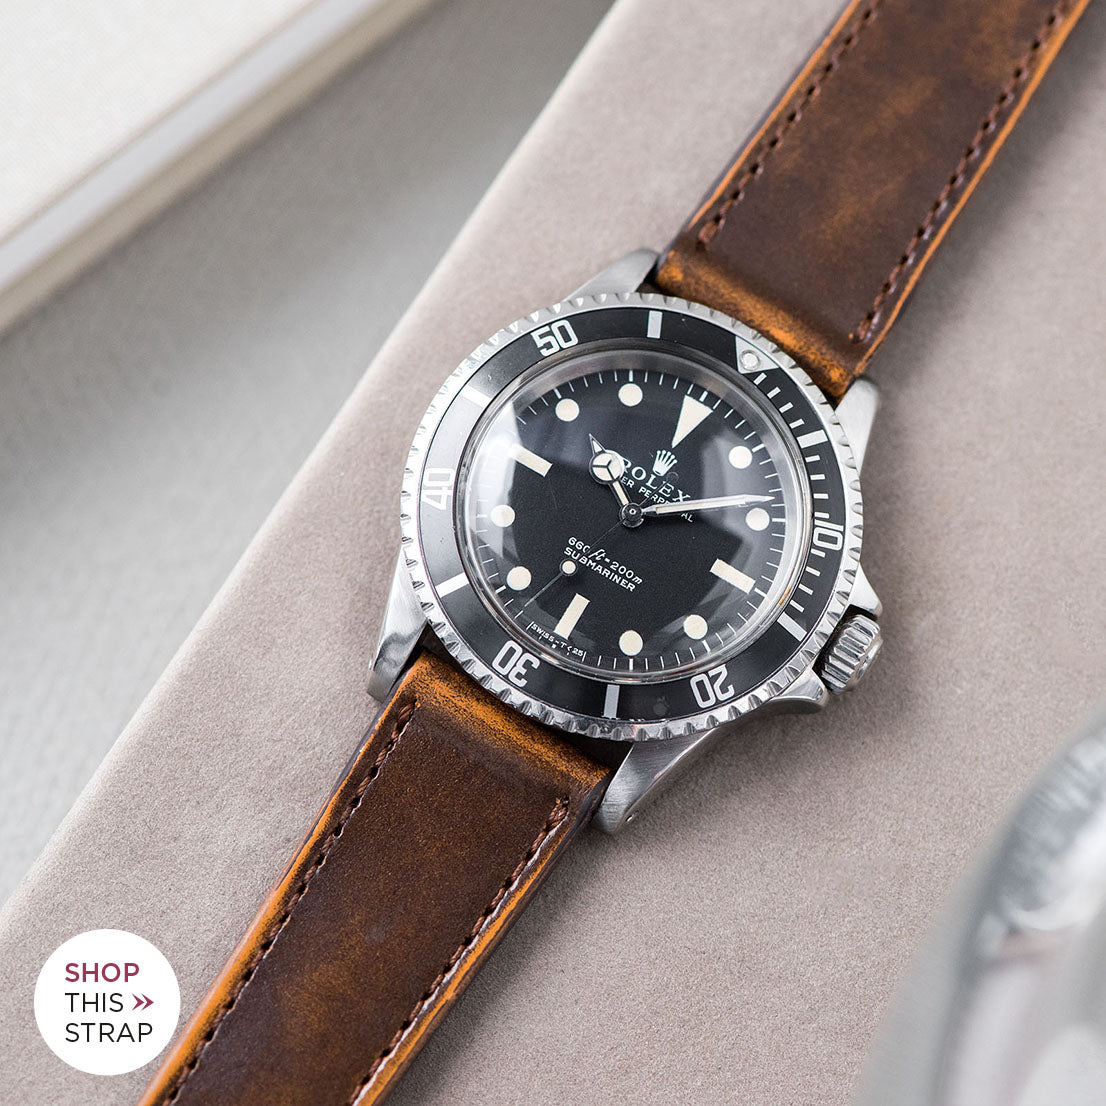 Bulang and Sons_Strap Guide_The Rolex 5513 Black Submariner_Degrade Honey Brown Leather Watch Strap